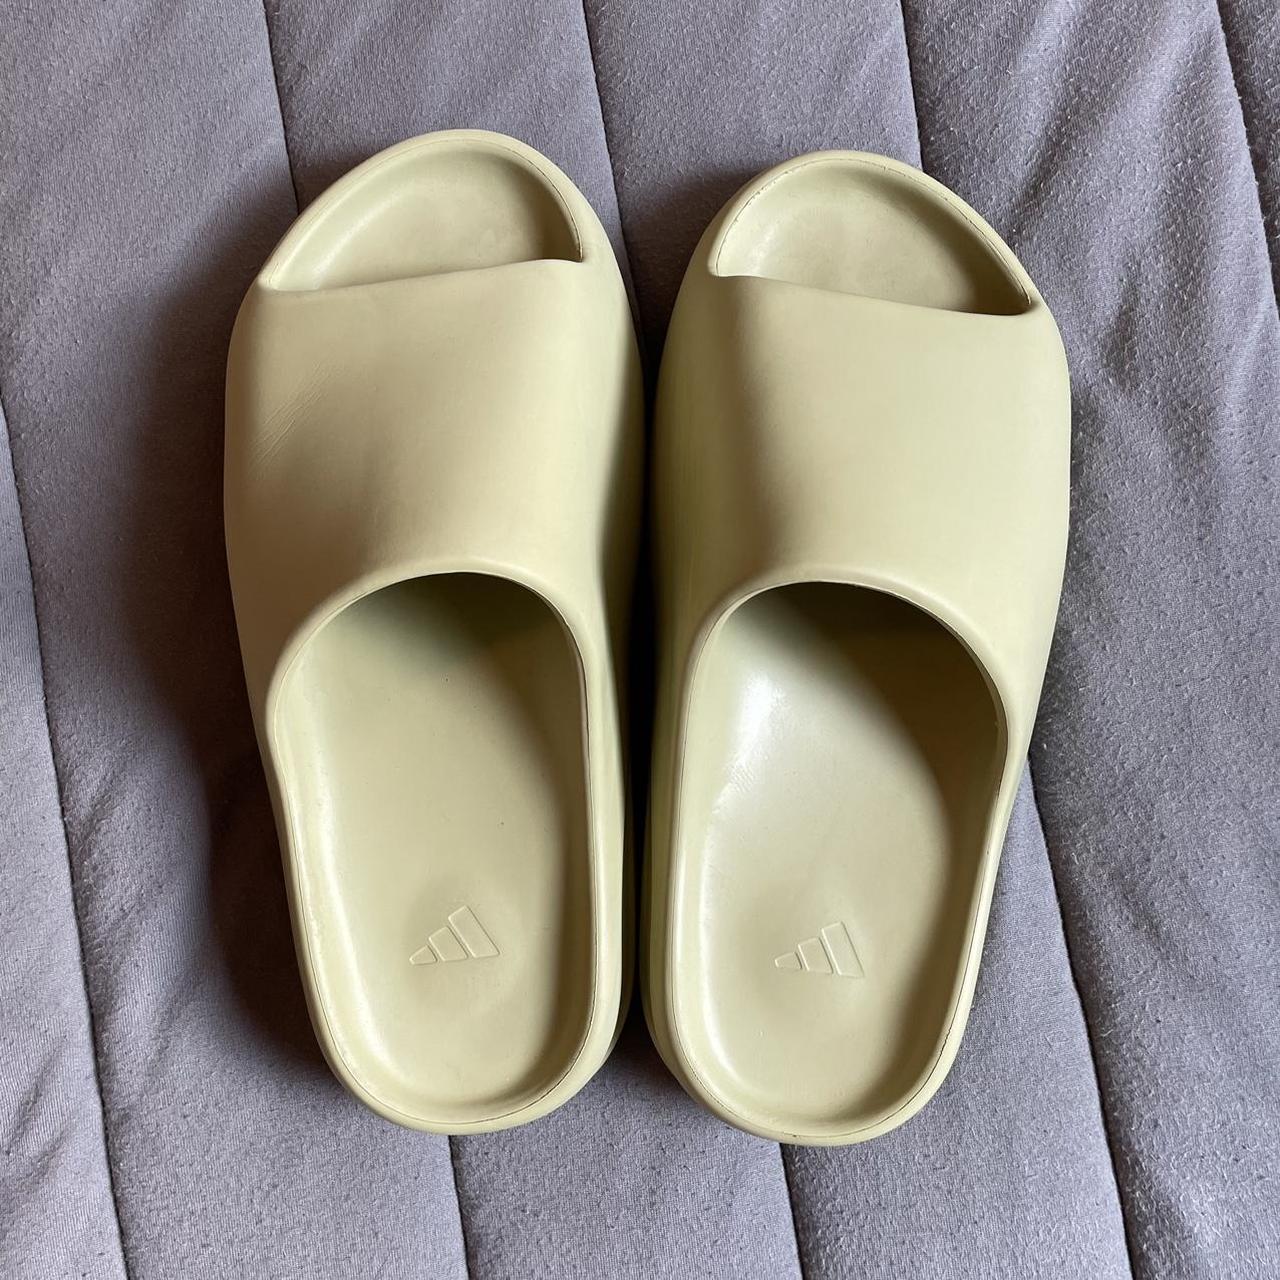 Yeezy slides in green. Size 9. Barely worn. No real... - Depop